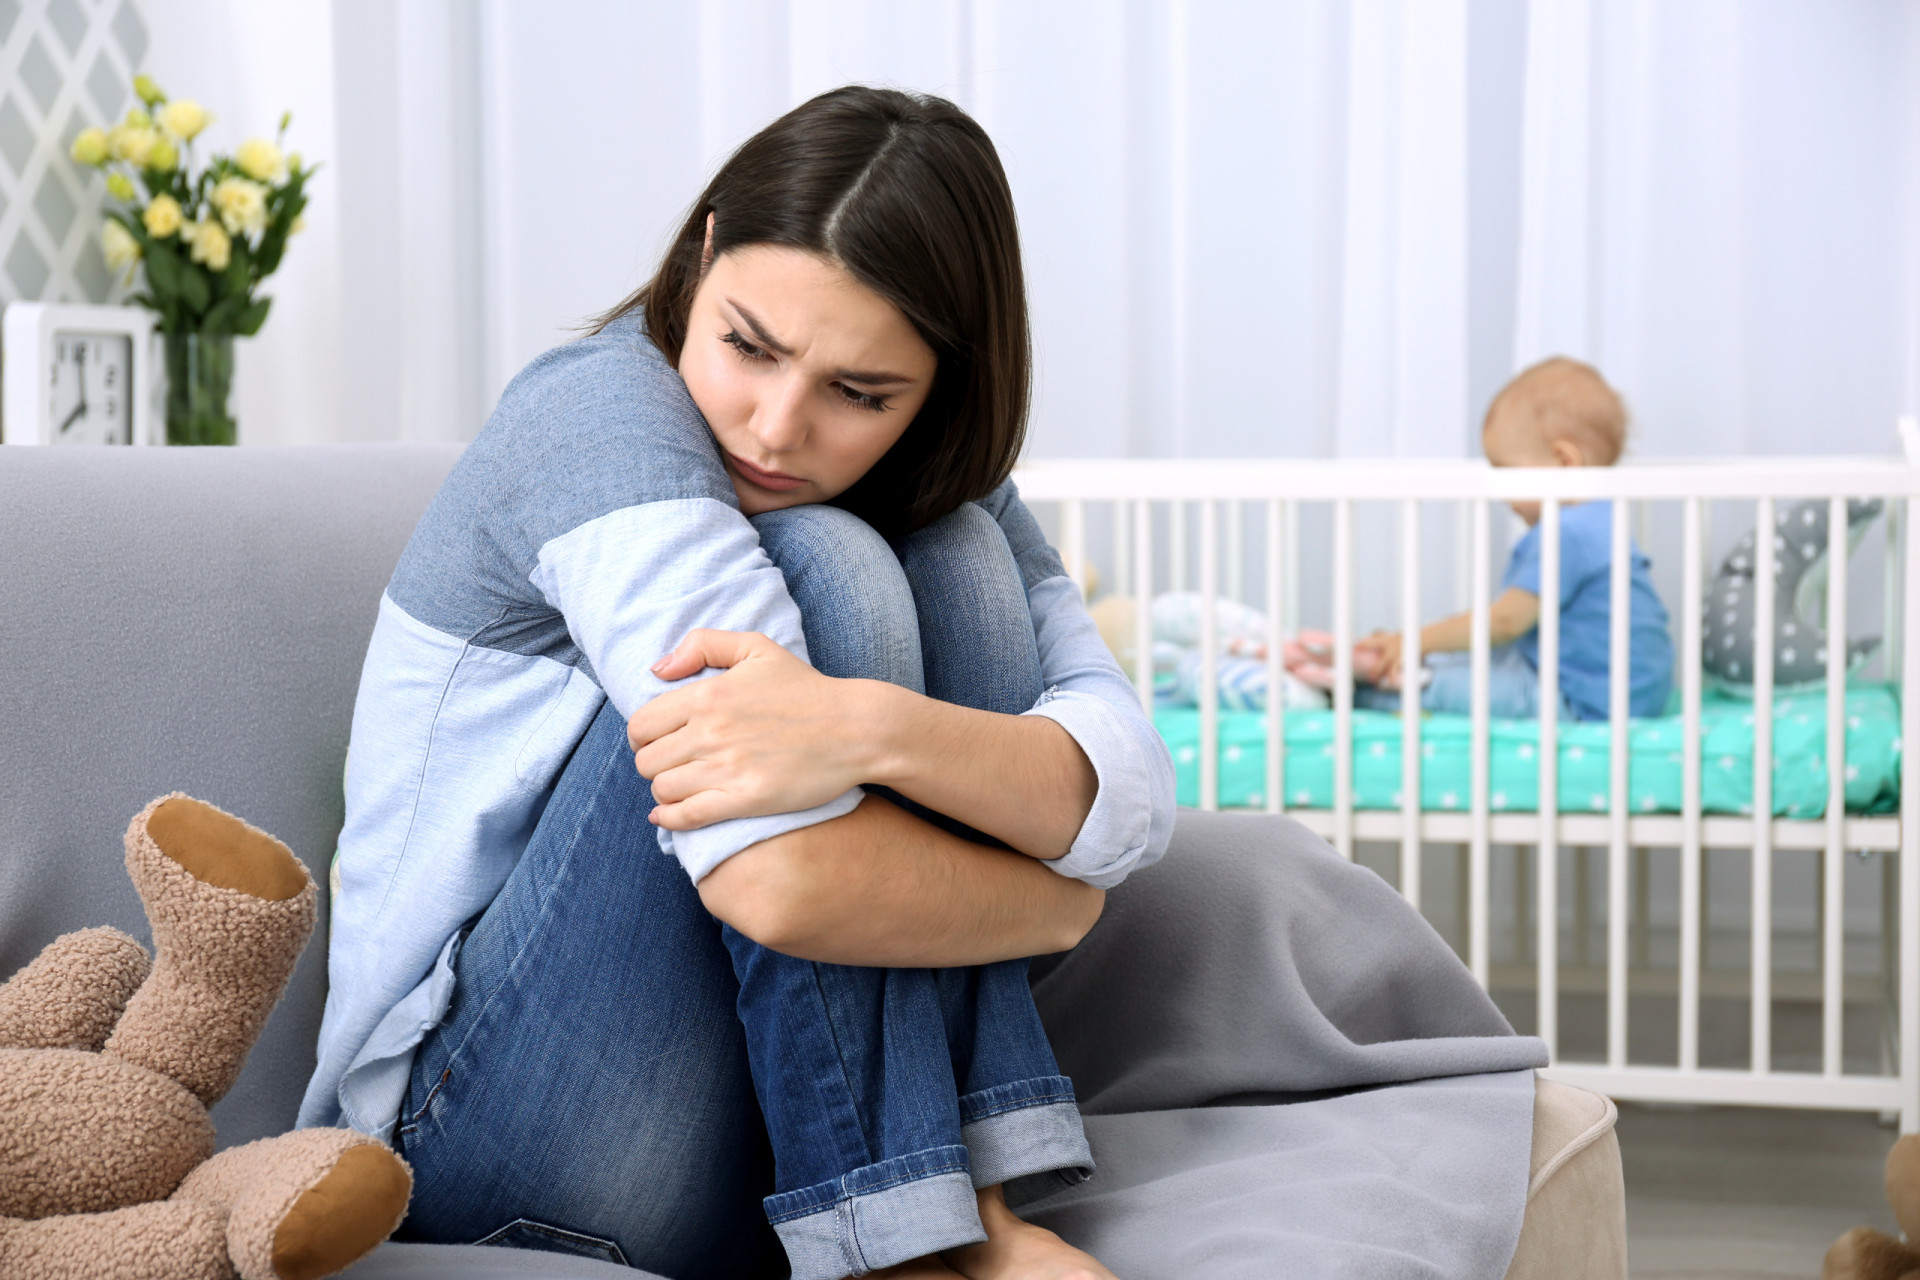 <p>Put simply, mom guilt is the feeling, or worry, of not doing enough as a parent, an all-pervasive sense of failure in raising your kids.</p><p><a href="https://www.msn.com/en-us/community/channel/vid-7xx8mnucu55yw63we9va2gwr7uihbxwc68fxqp25x6tg4ftibpra?cvid=94631541bc0f4f89bfd59158d696ad7e">Follow us and access great exclusive content every day</a></p>